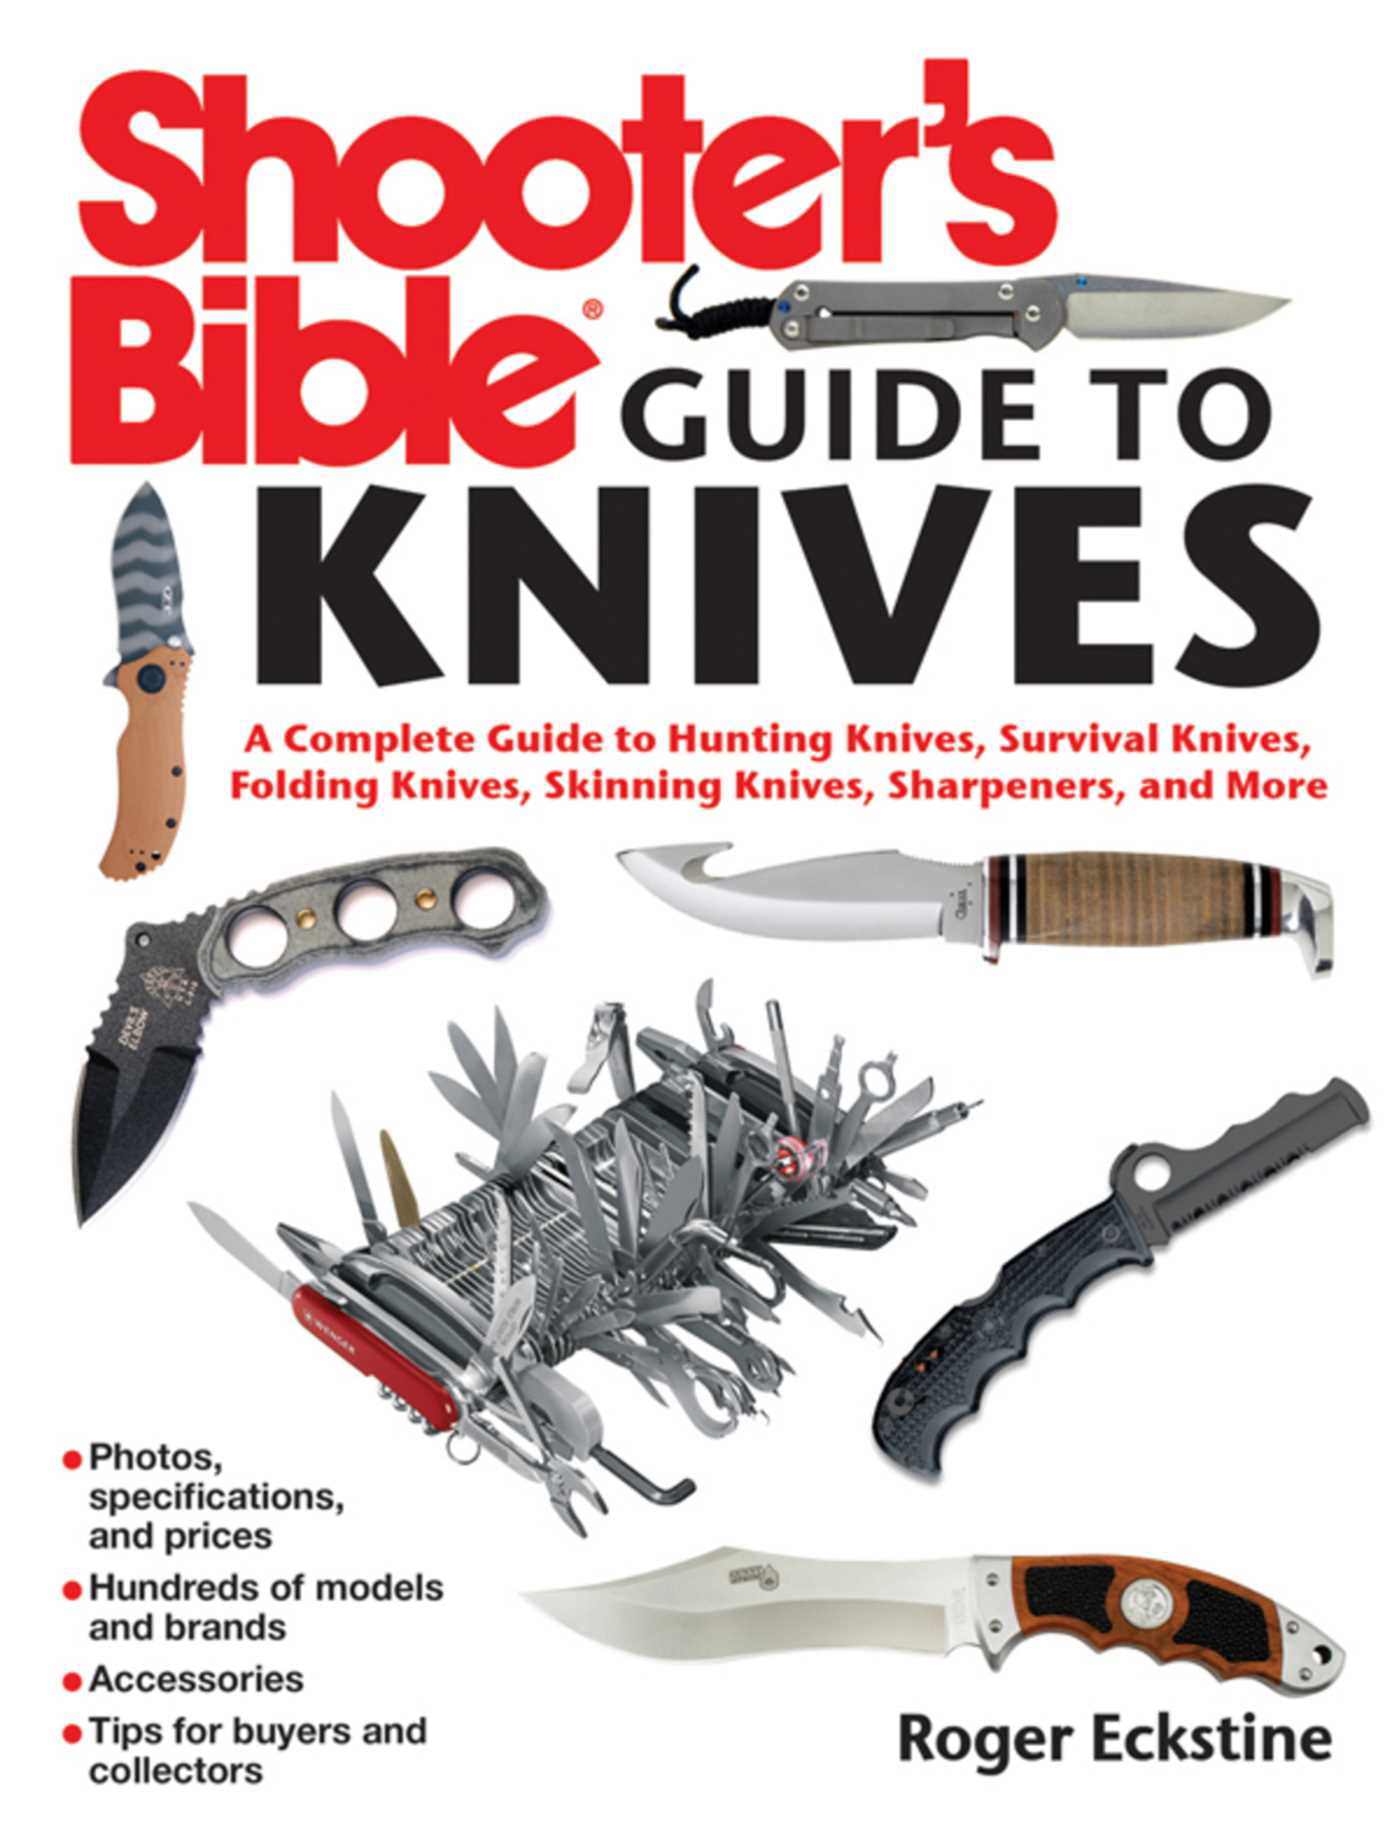 Buy Shooter's Bible Guide to Knives